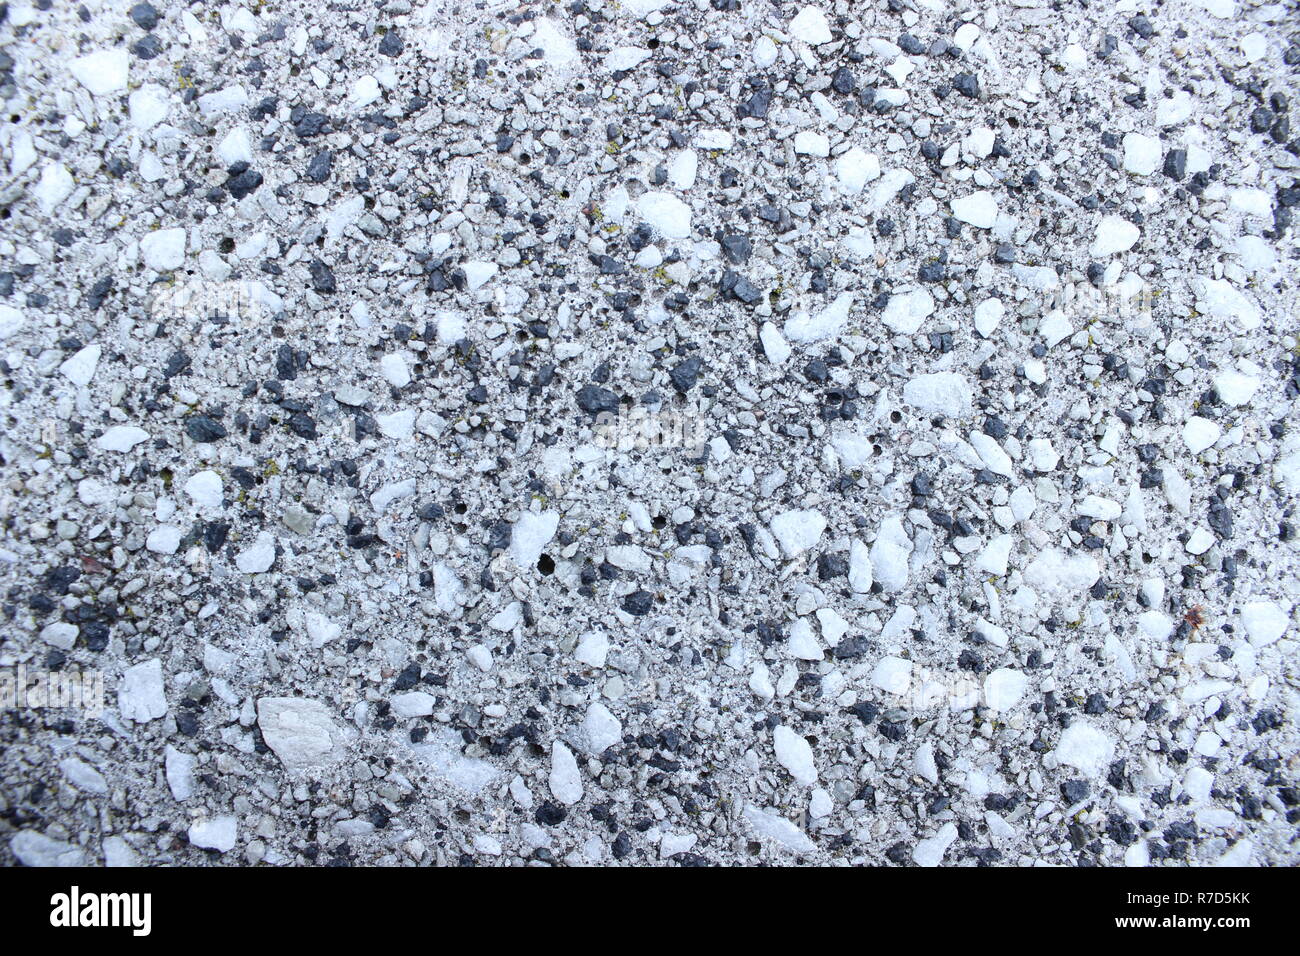 Rock ground texture; good representation of a sidewalk or gravel, industrial areas, cityscapes Stock Photo